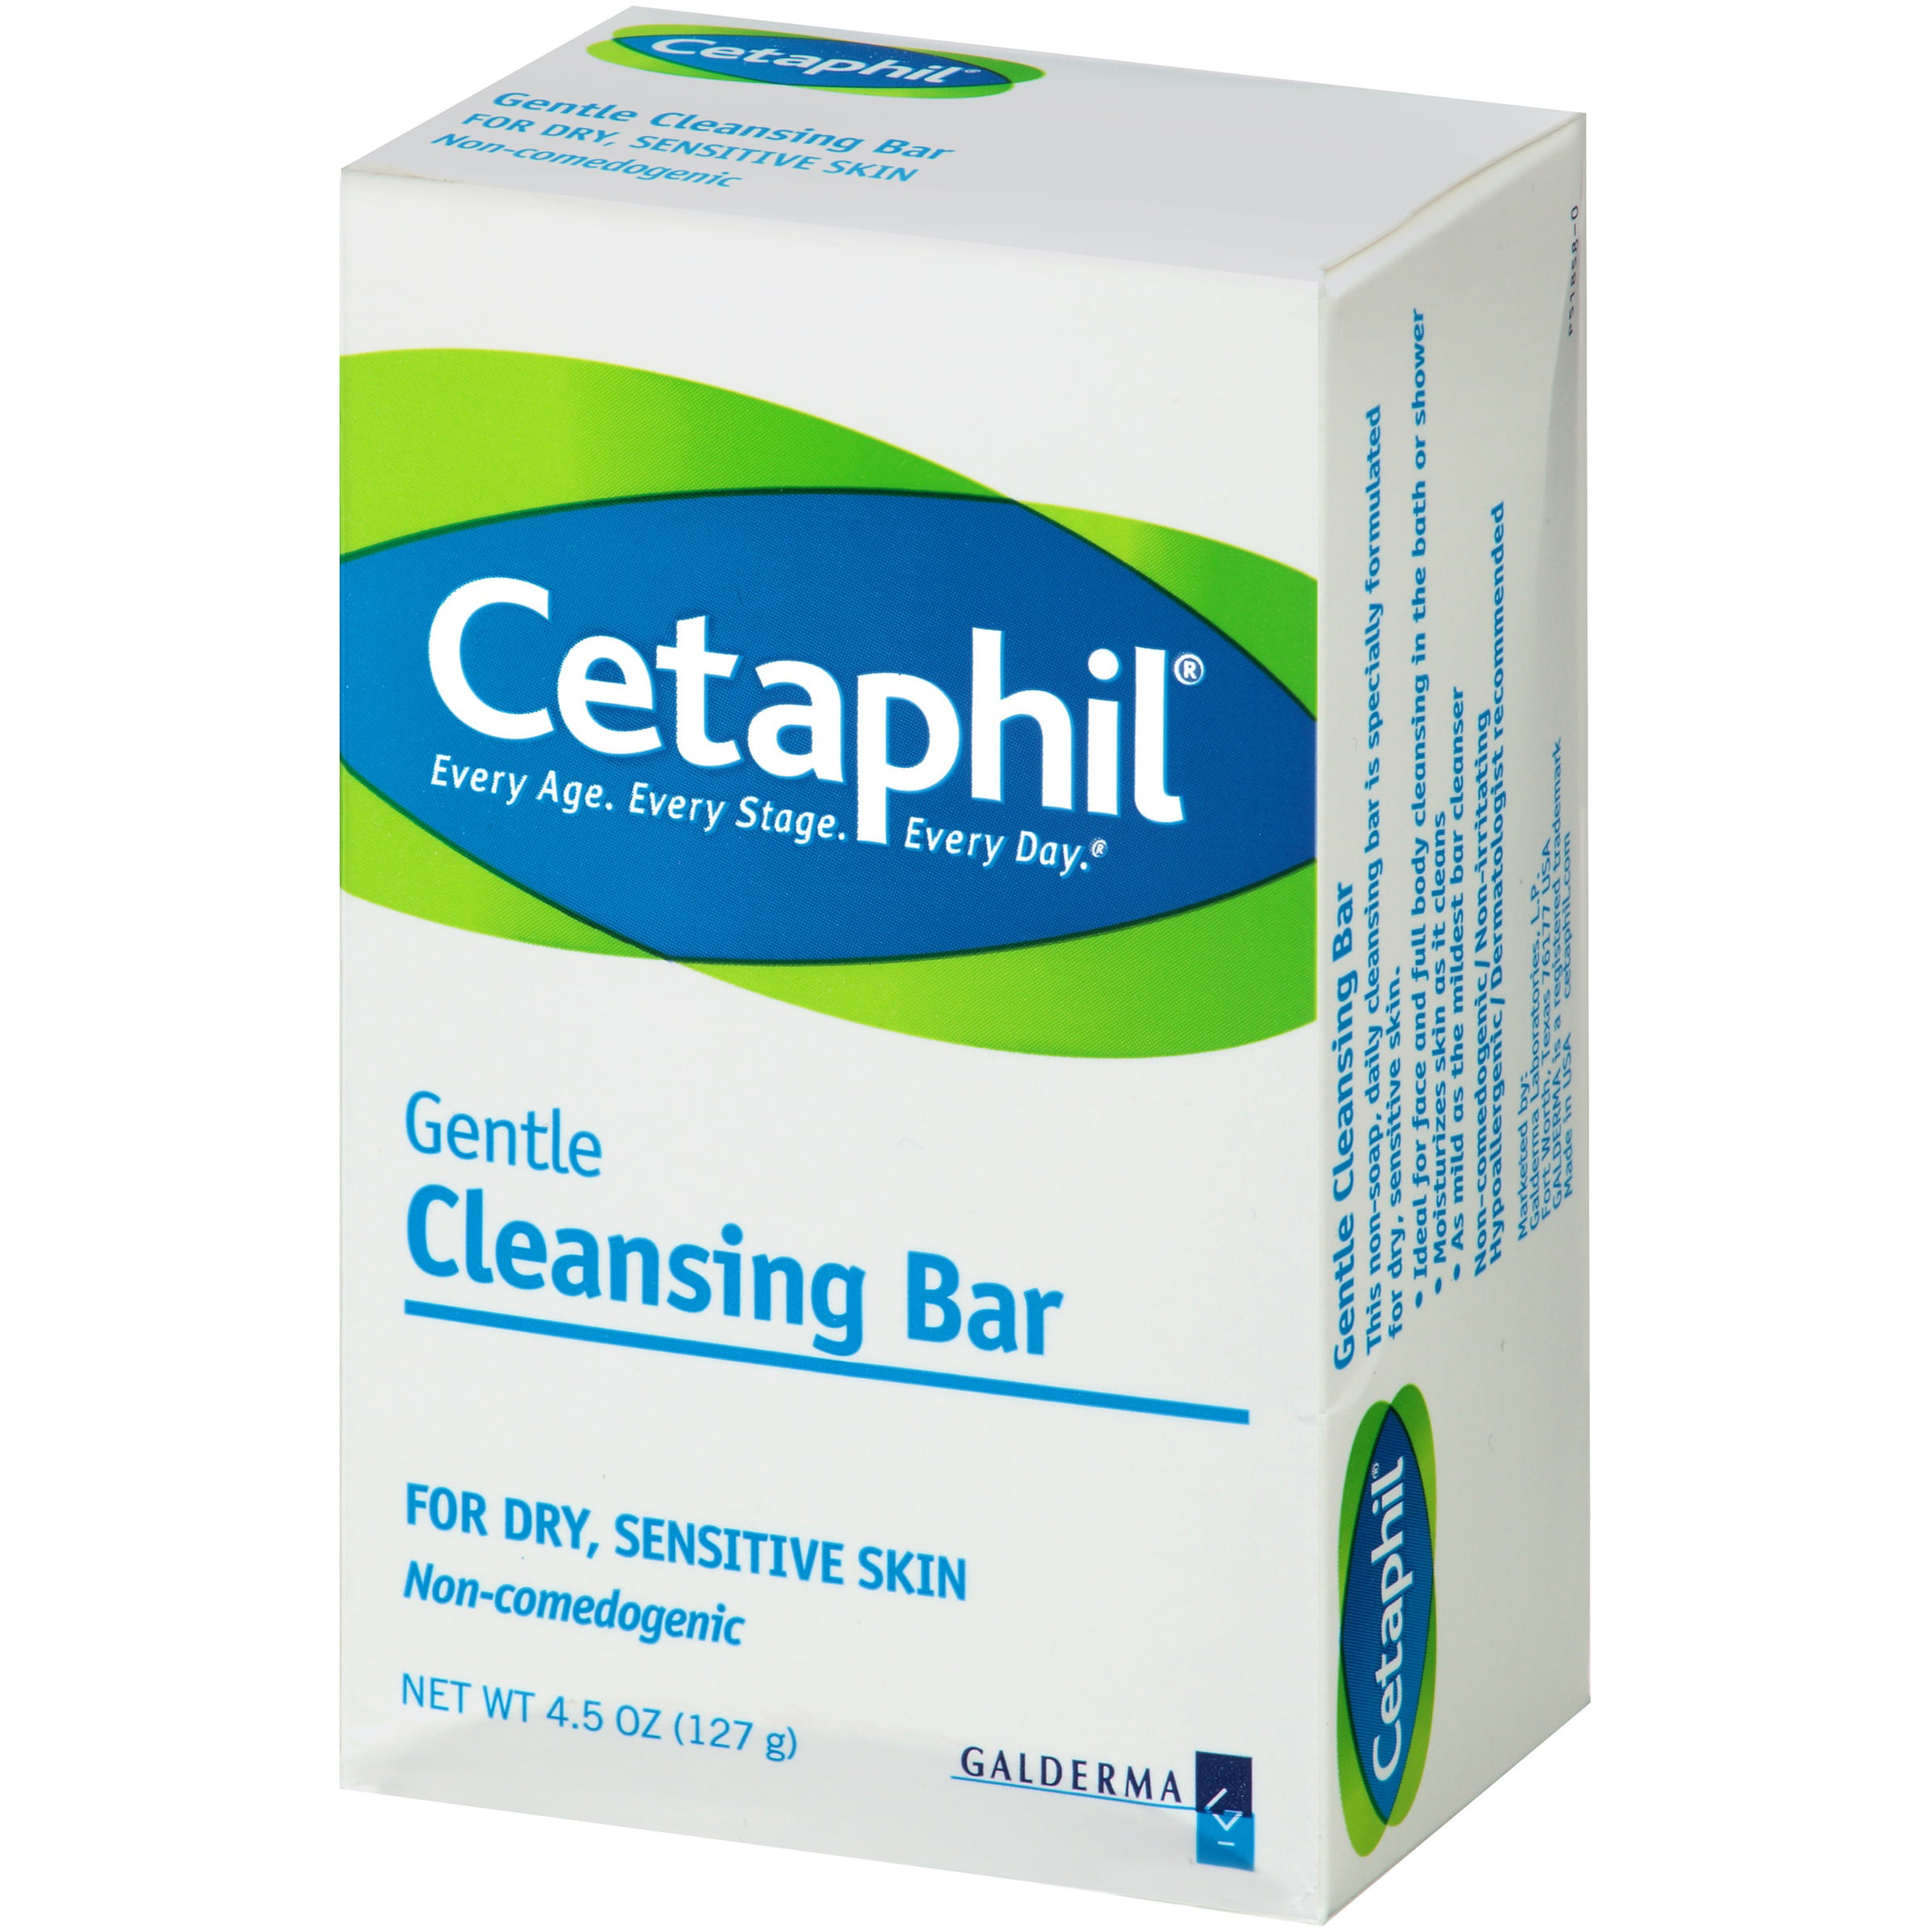 cetaphil bar soap for baby price